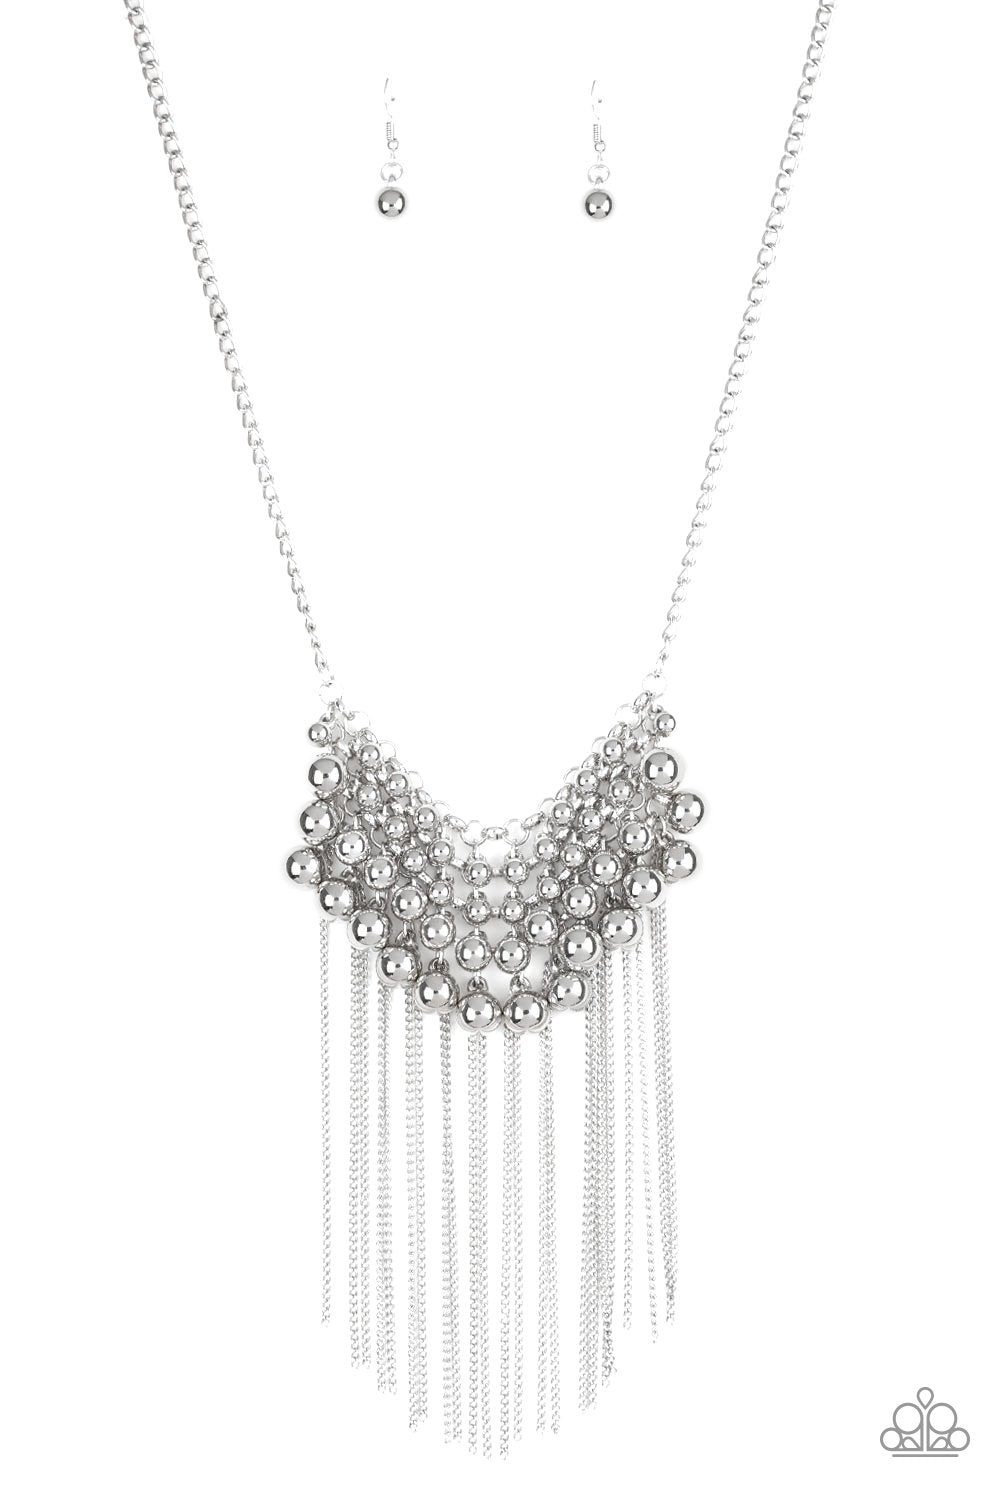 DIVA-de and Rule Silver Necklace - Paparazzi Accessories - lightbox -CarasShop.com - $5 Jewelry by Cara Jewels